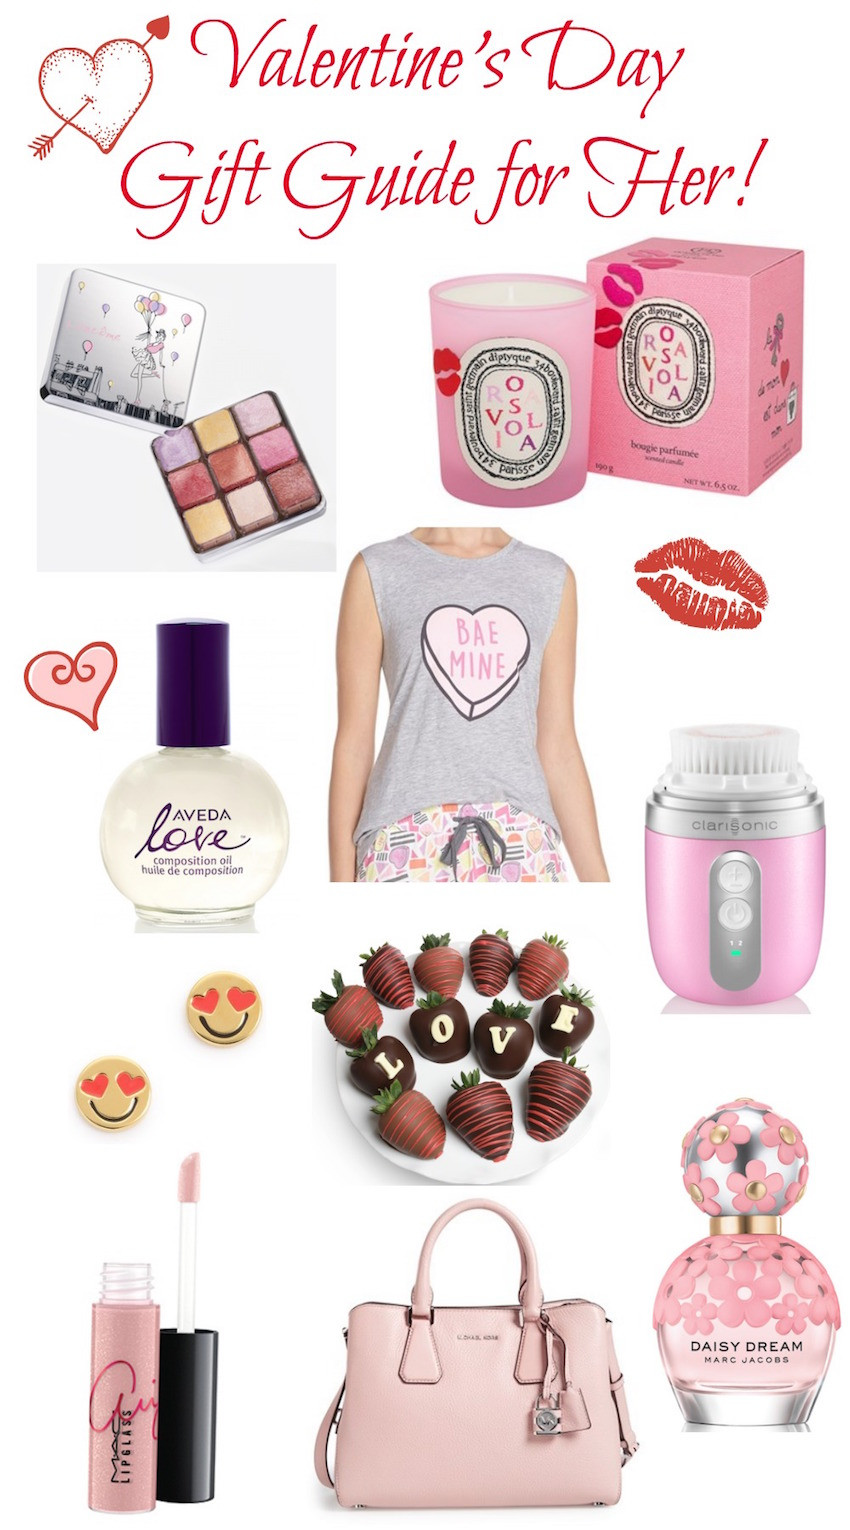 Valentines Day Gift Guide
 Valentine’s Day Gifts for Her